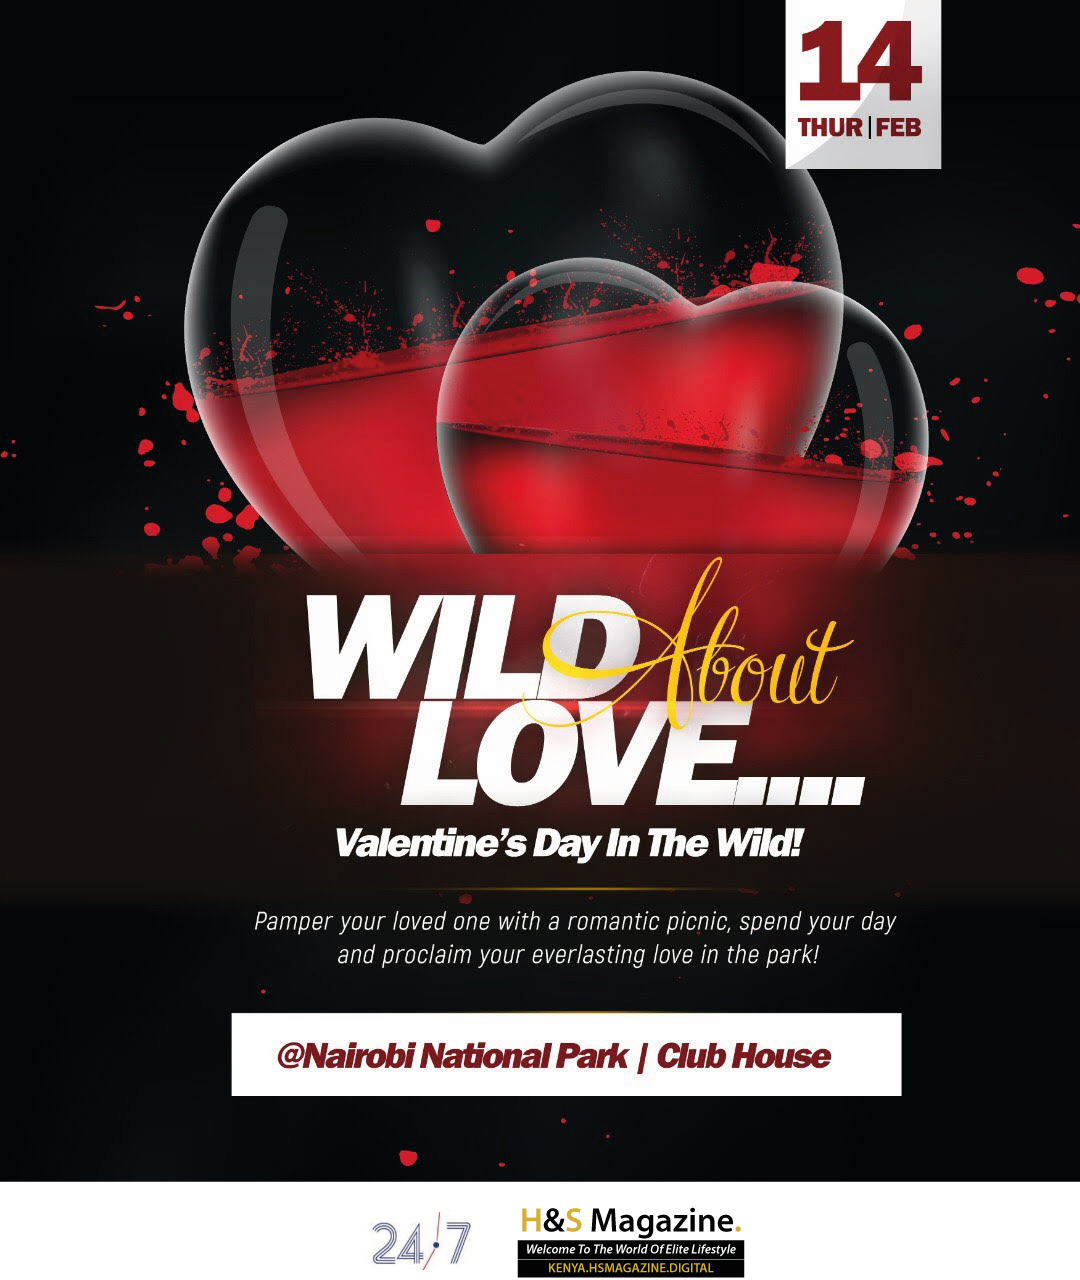 Celebrate This Valentine's Day In The Wild!